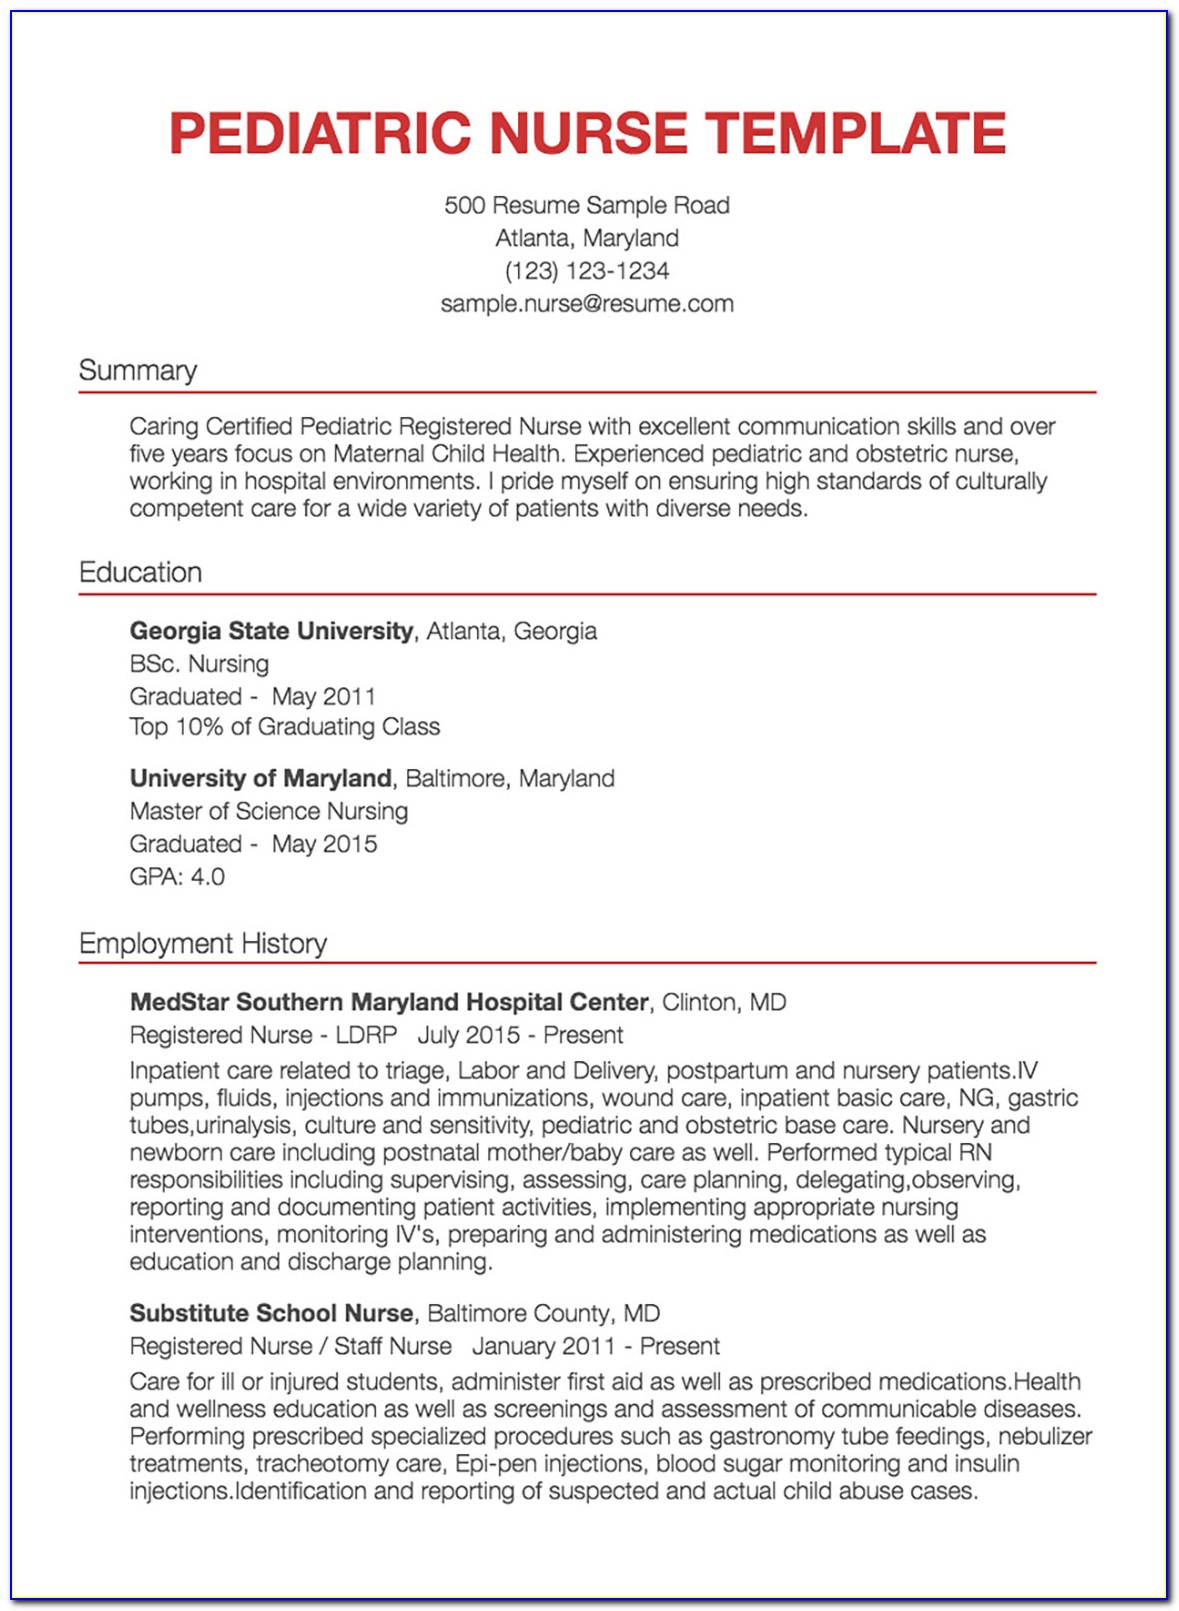 Examples Of Resumes For Nurses